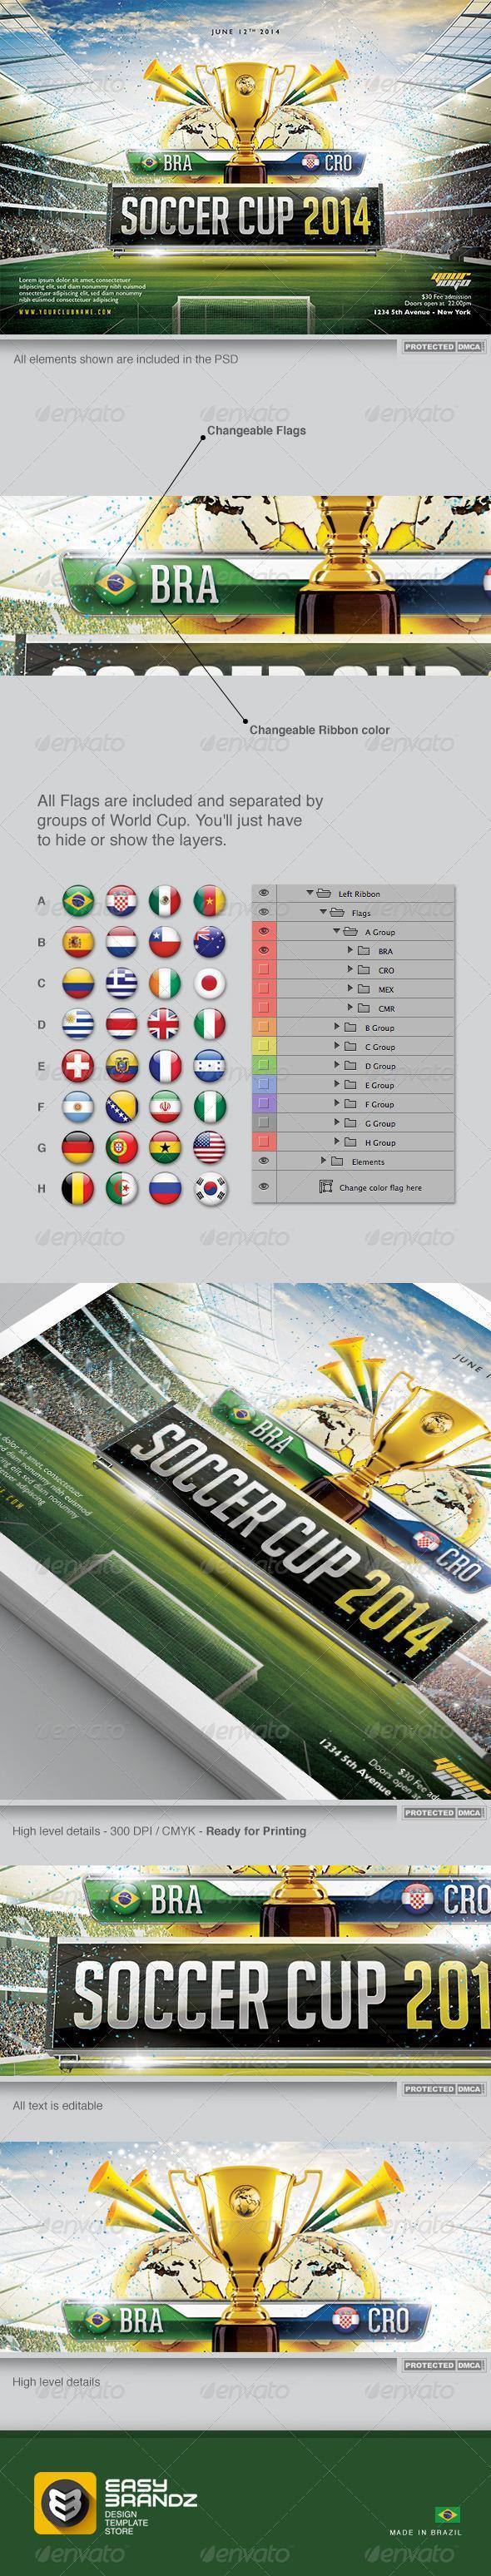 Soccer Cup 2014 Flyer Template PSD